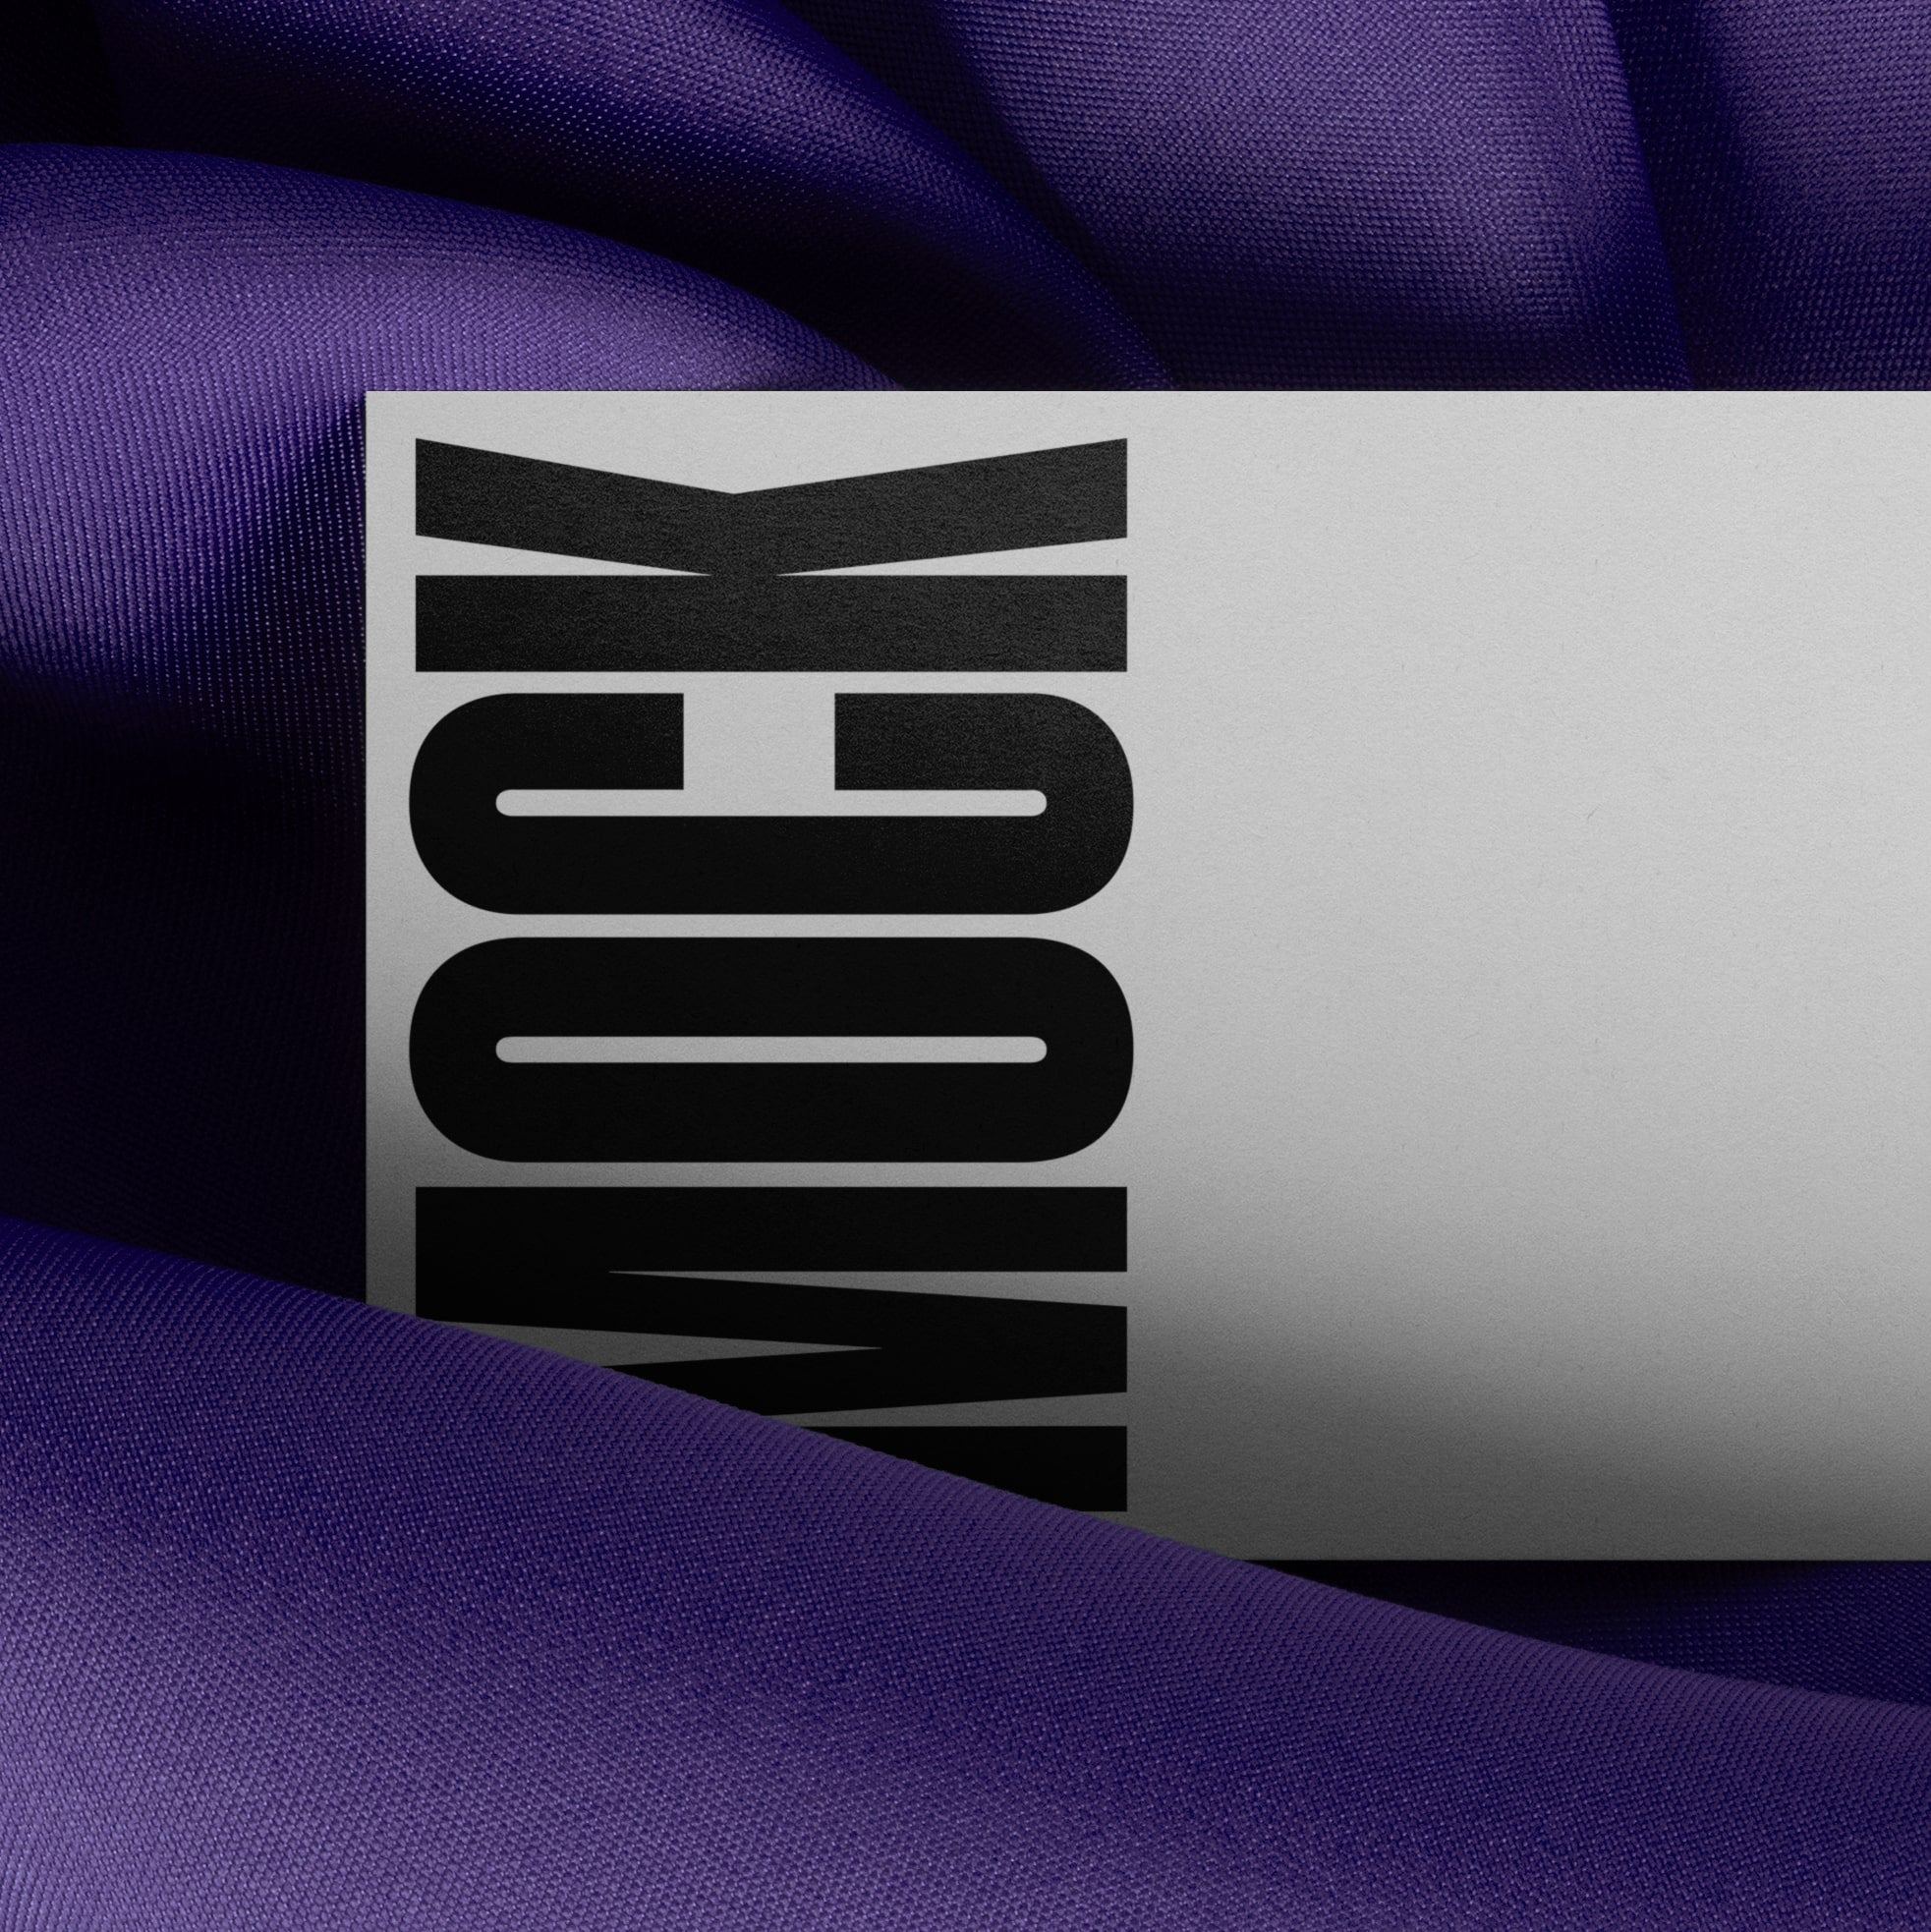 High-quality branding mockup featuring stationery print items, showing a business card on a purple background made of cloth fabric. Created by Sylvan Hillebrand.